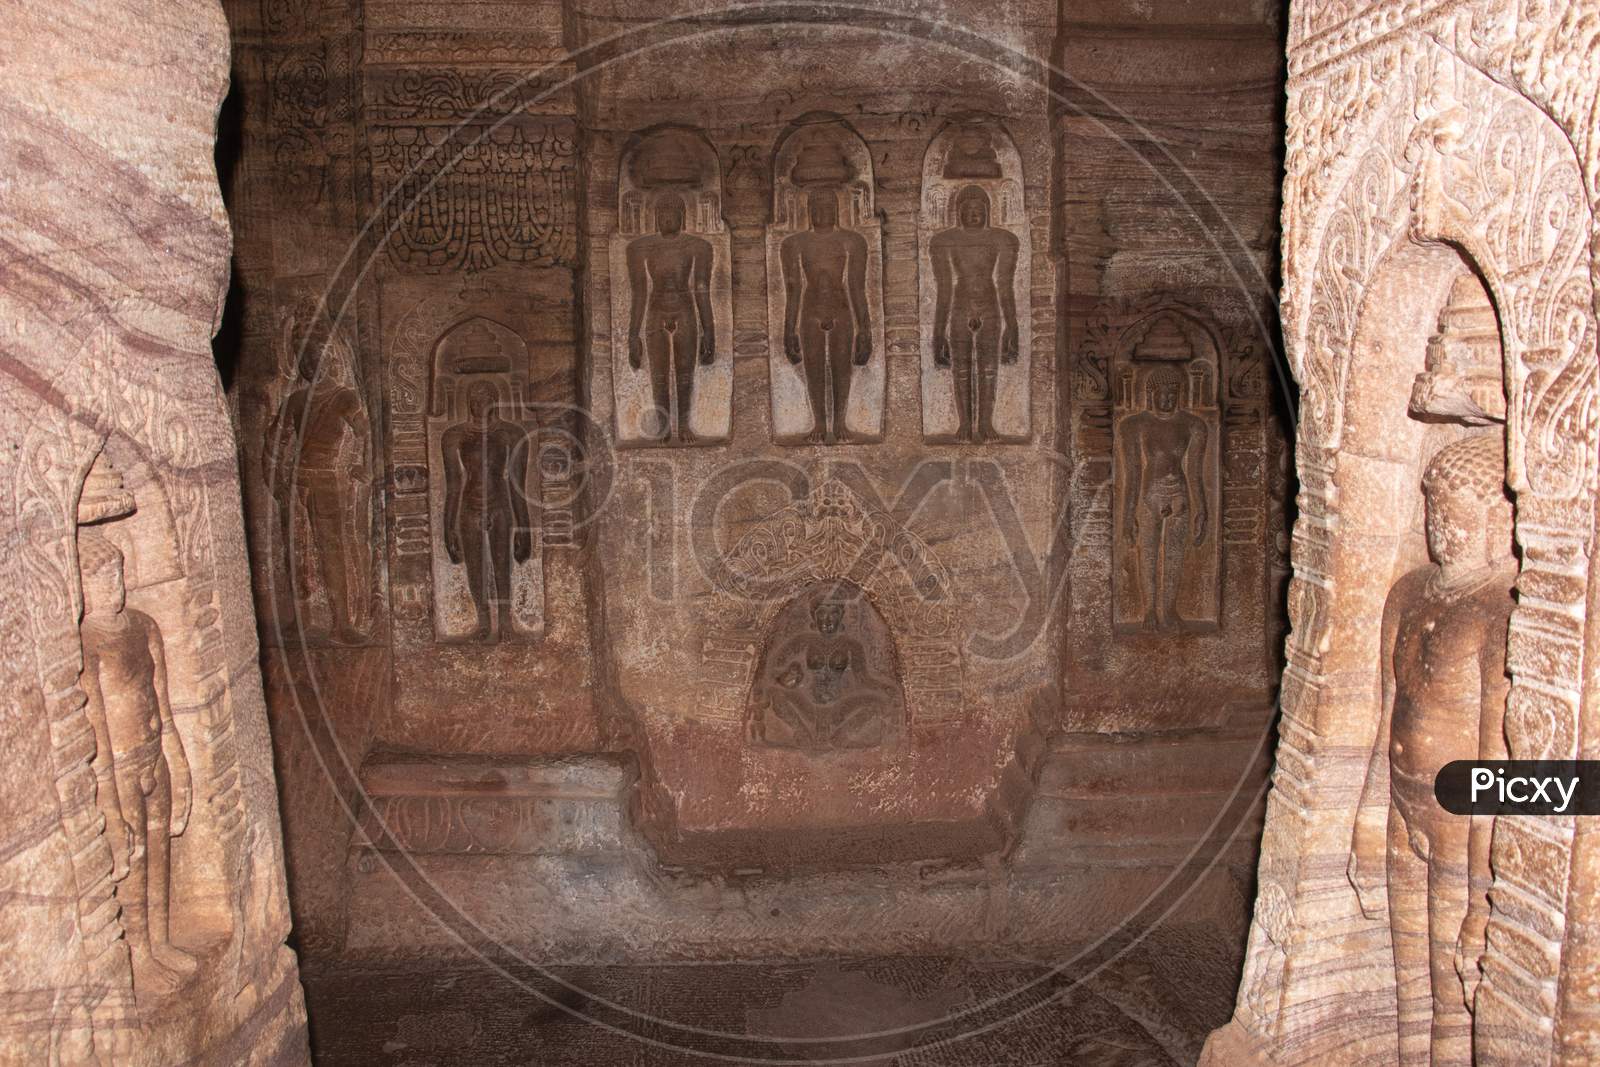 Cave Sculptures Of Jain Gods Carved On Walls Ancient Stone Art In Details